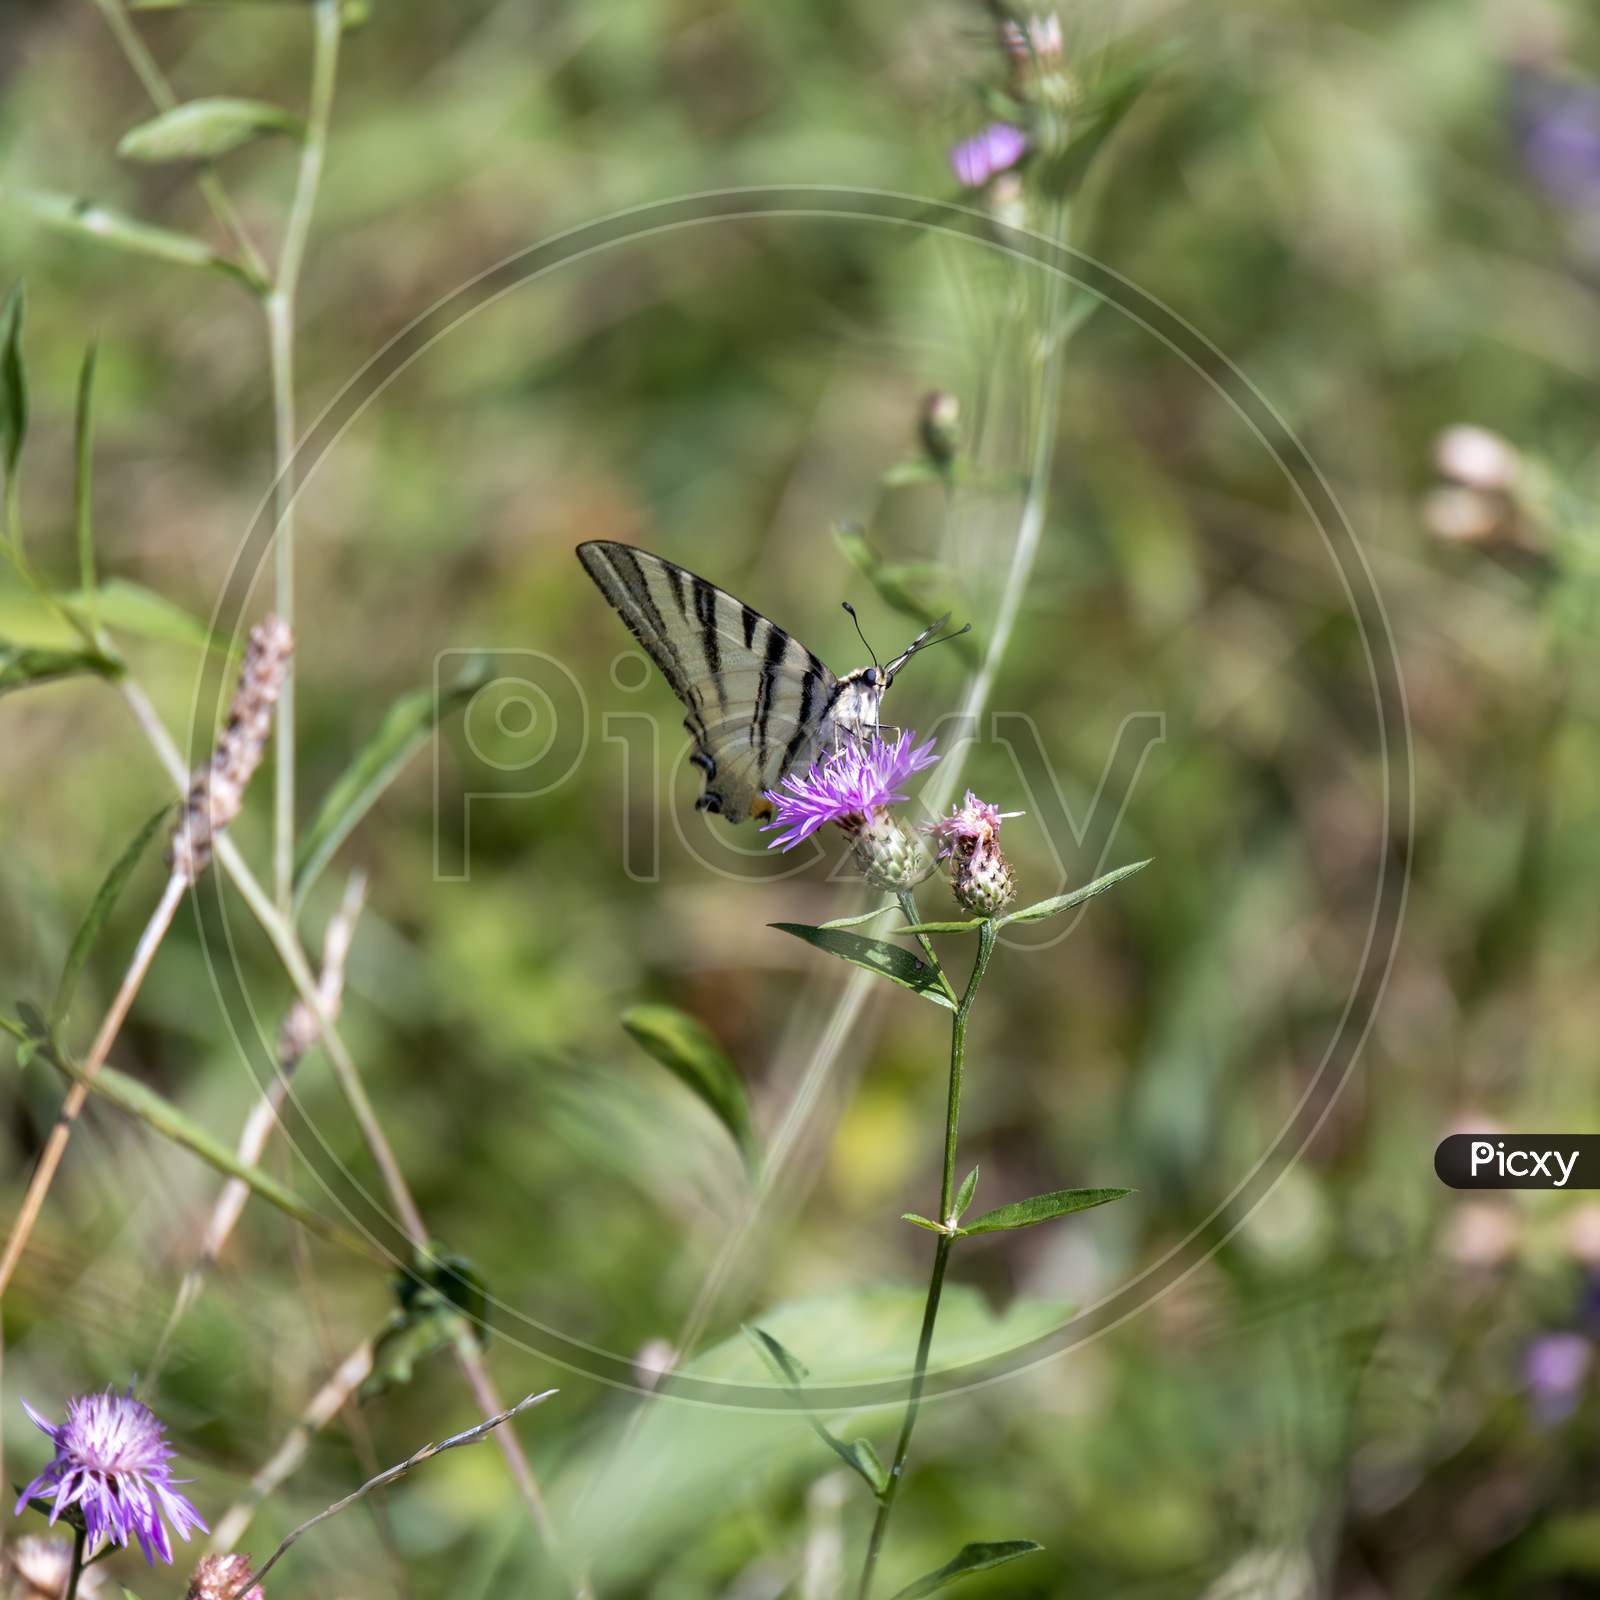 Swallowtail Butterfly Feeding On A Flower At Torre De' Roveri In Italy